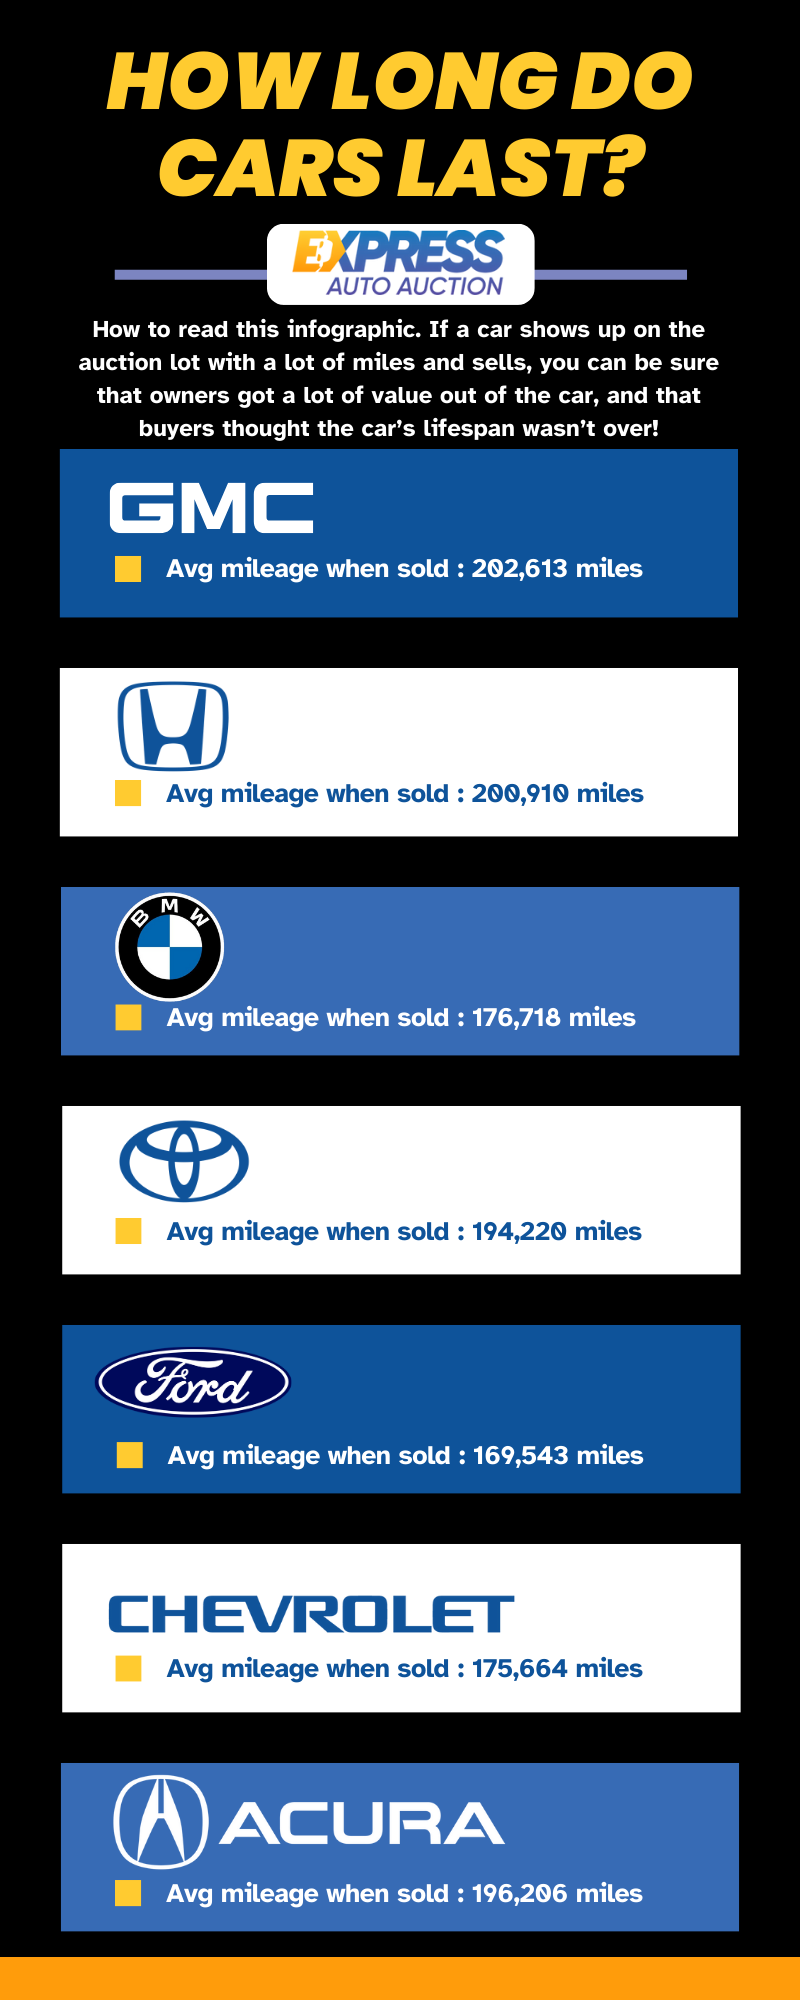 This infographic gives you some information of how long a car will last based on mileage when the brand was sold at auction.